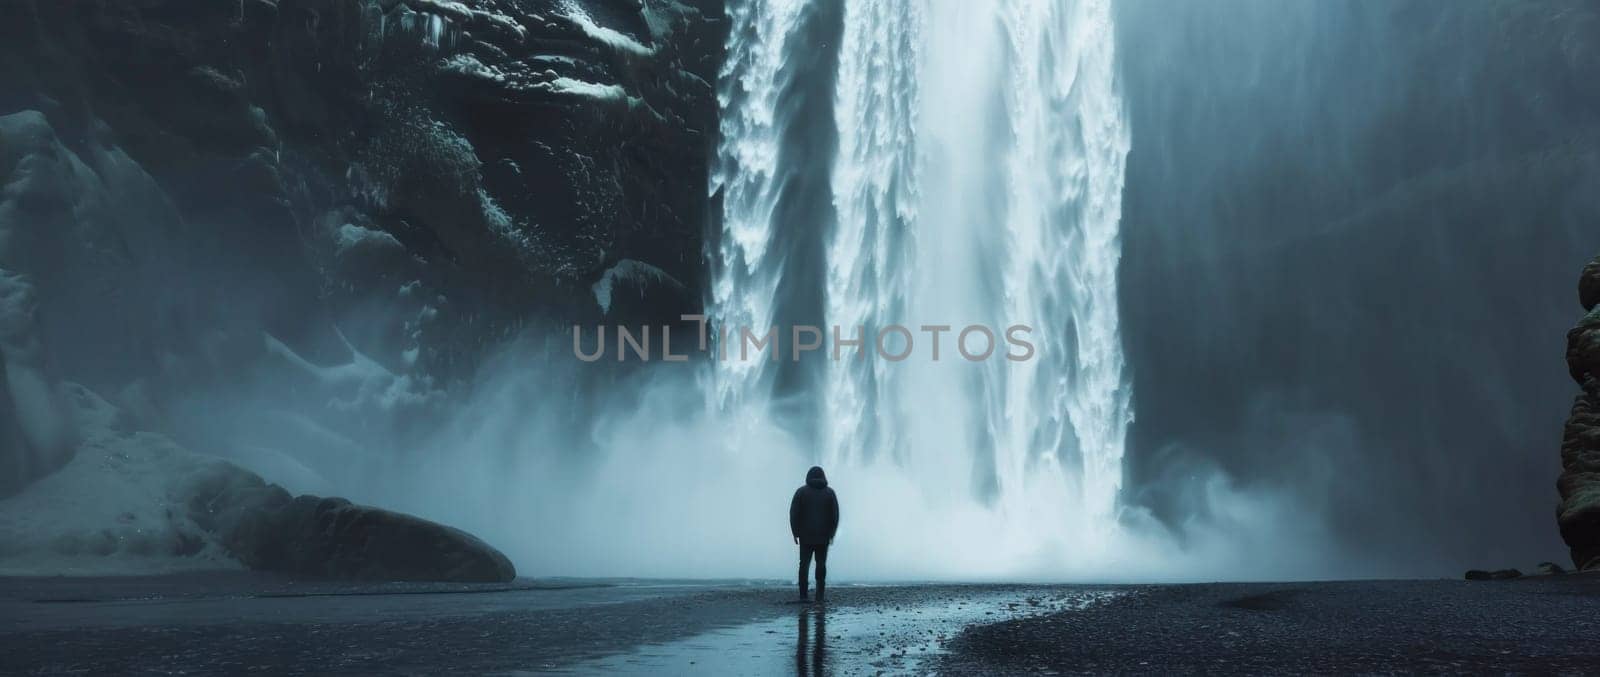 Adventure traveler standing in awe of majestic waterfall surrounded by nature's beauty and tranquility